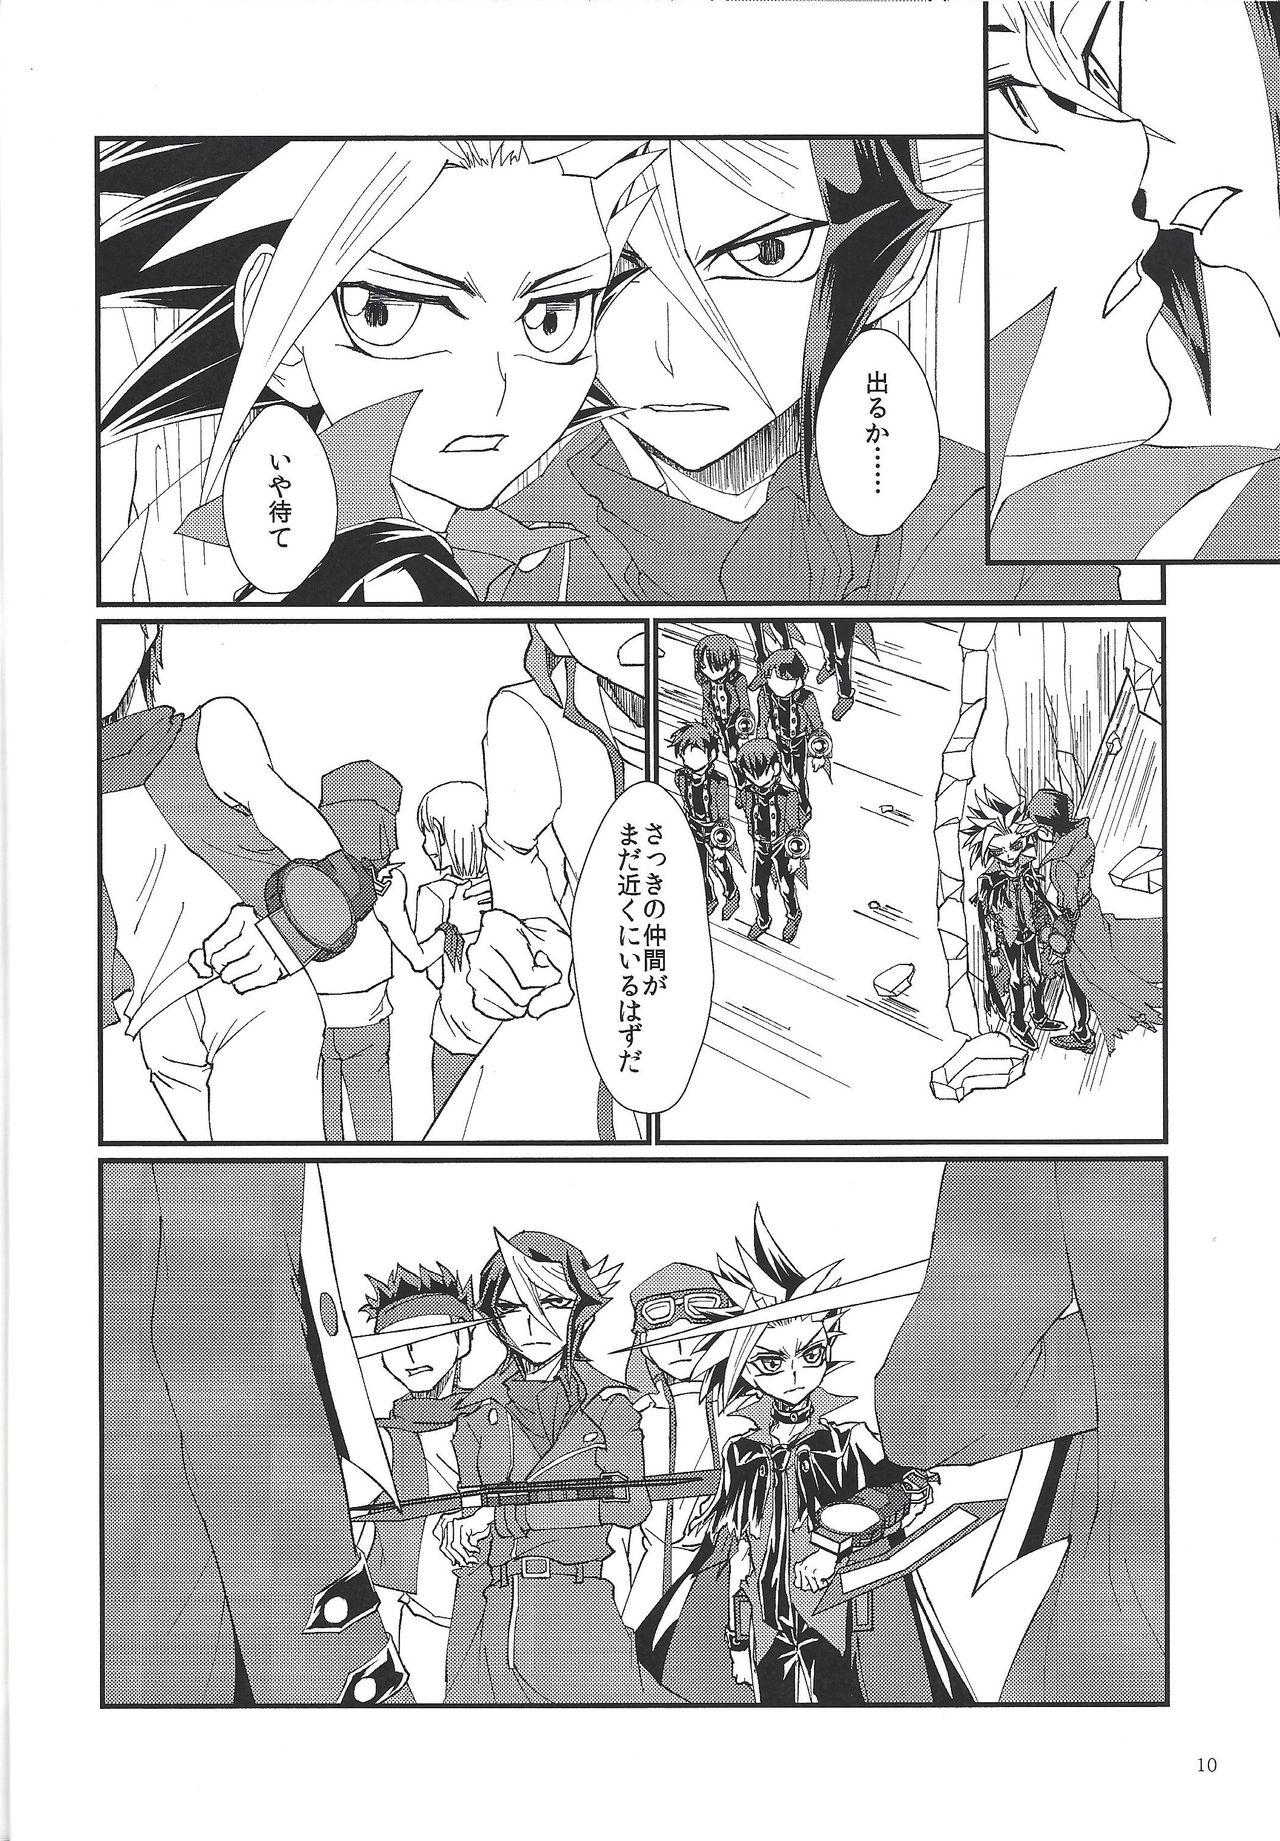 Transsexual Date - Yu-gi-oh arc-v Viet - Page 9